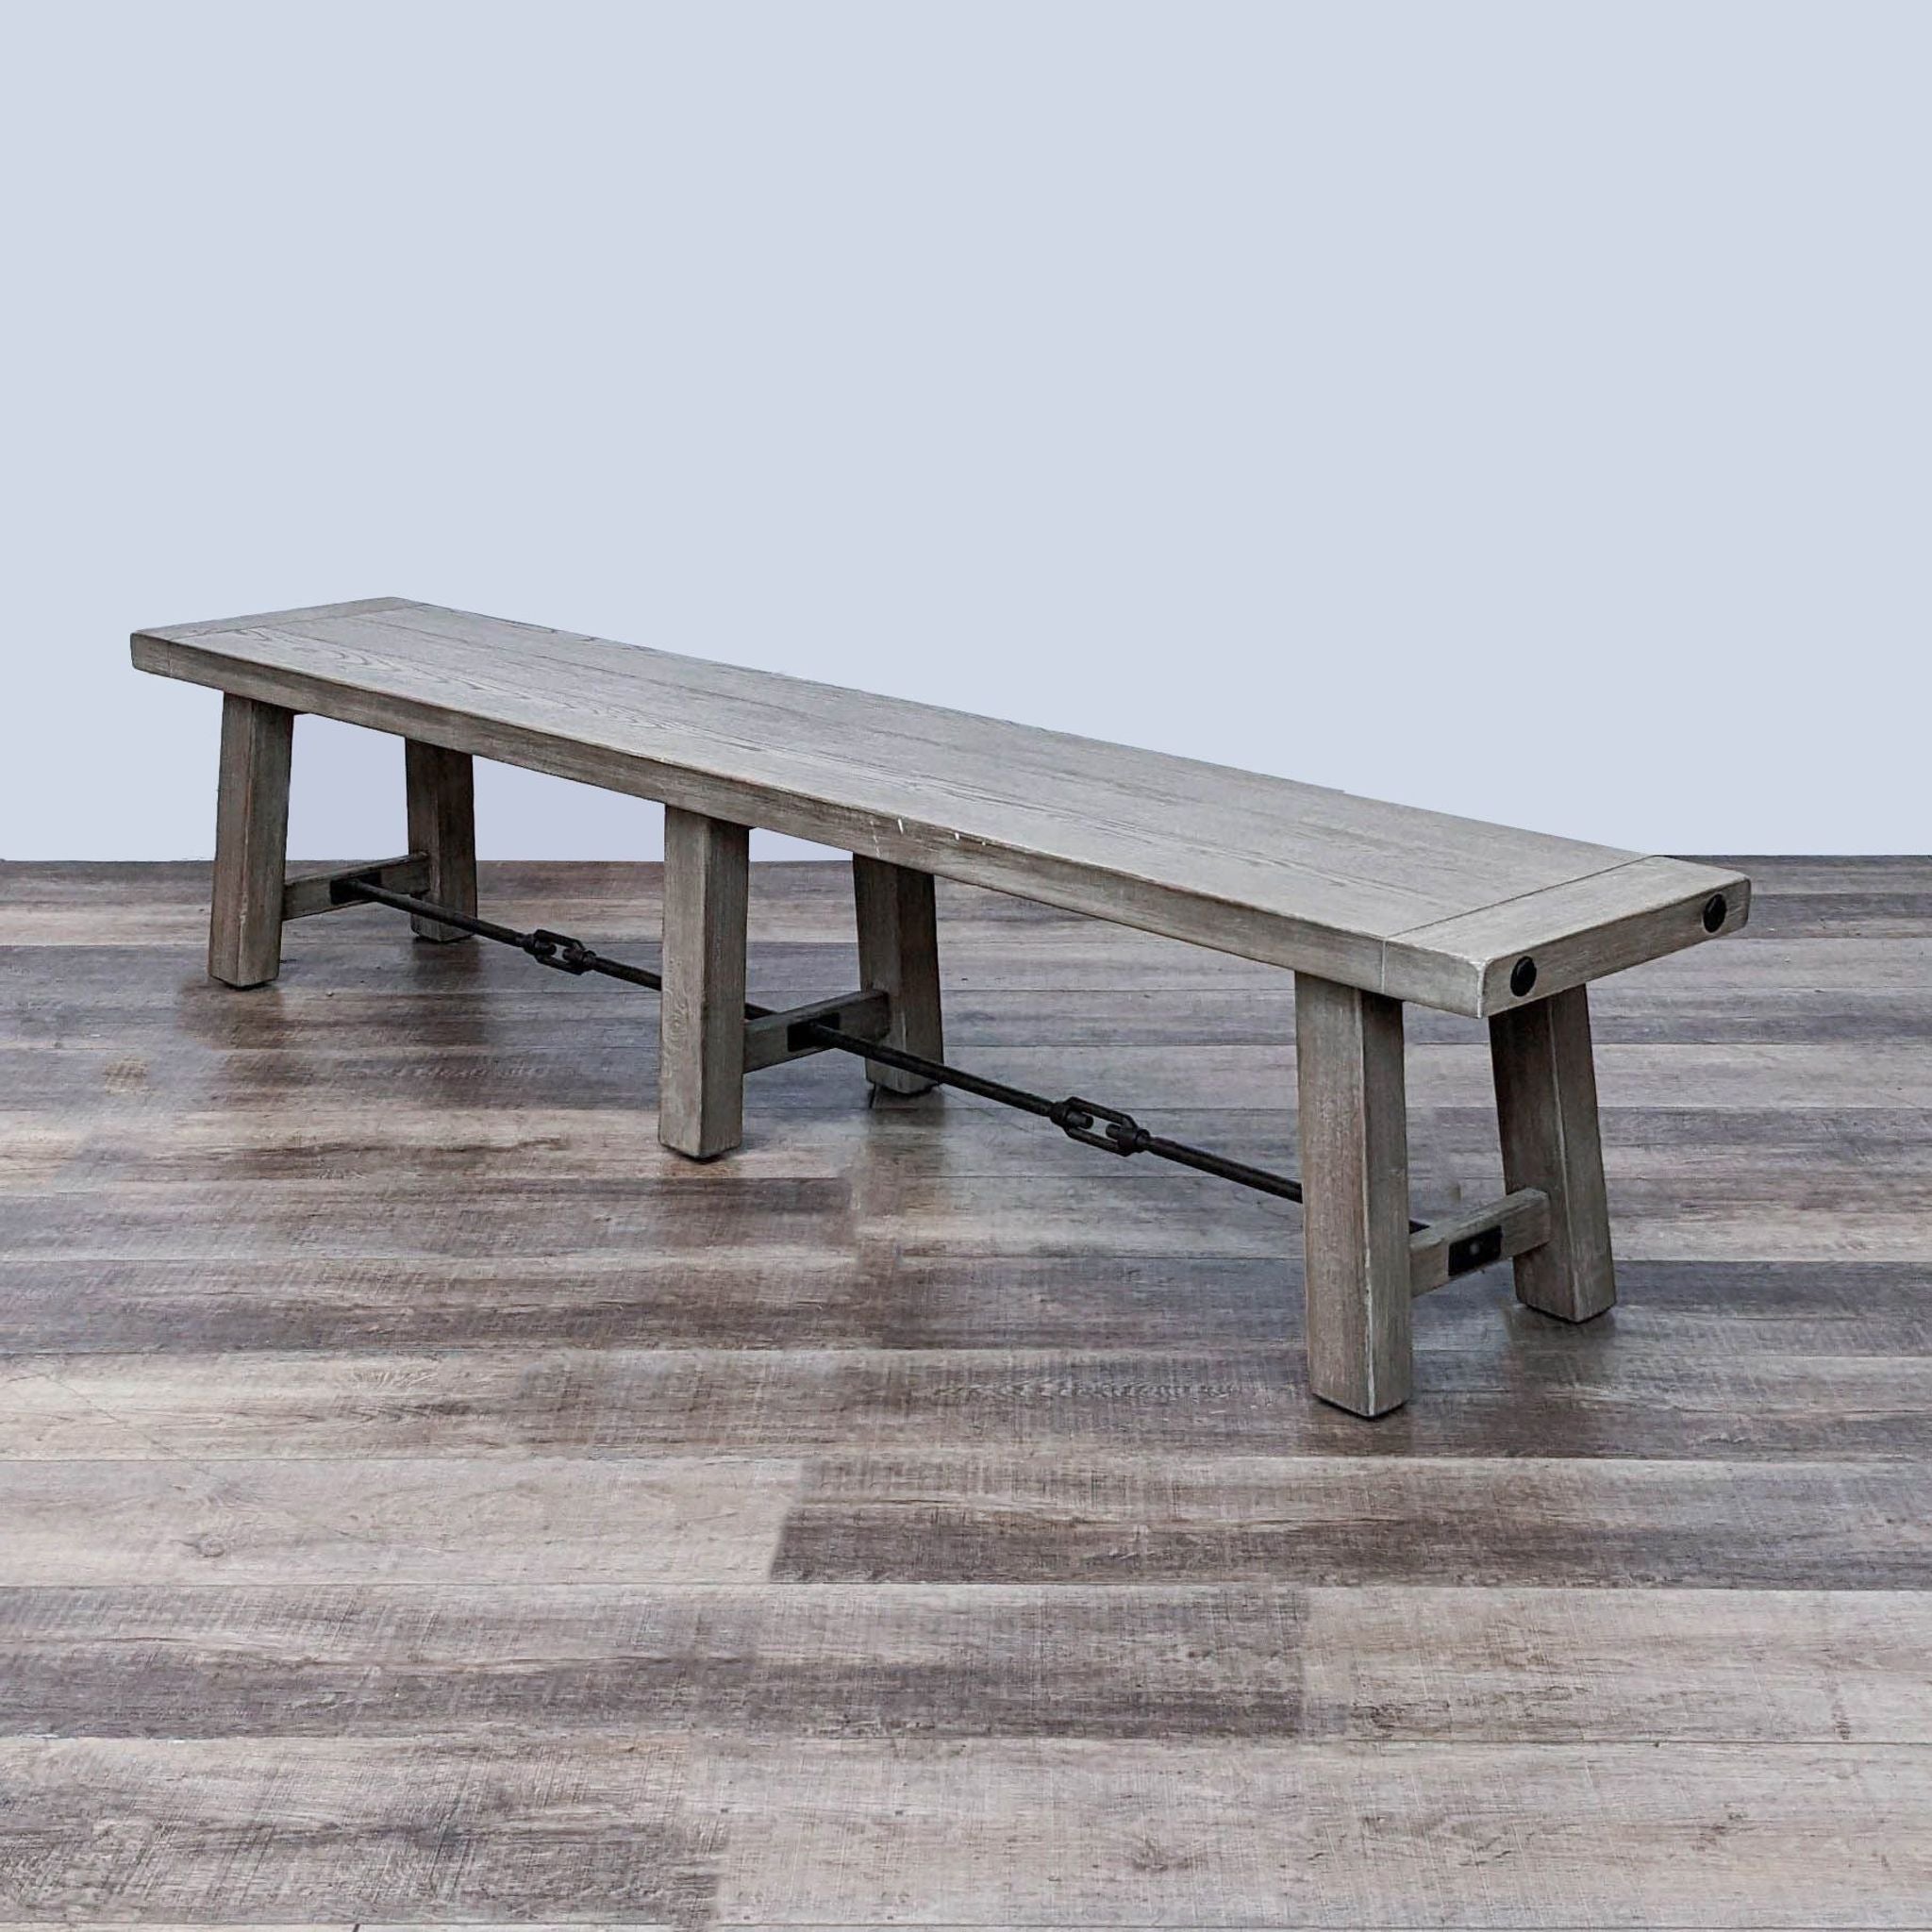 Alt text 1: Pottery Barn rustic wood dining bench with metal accents, set against a hardwood floor background.